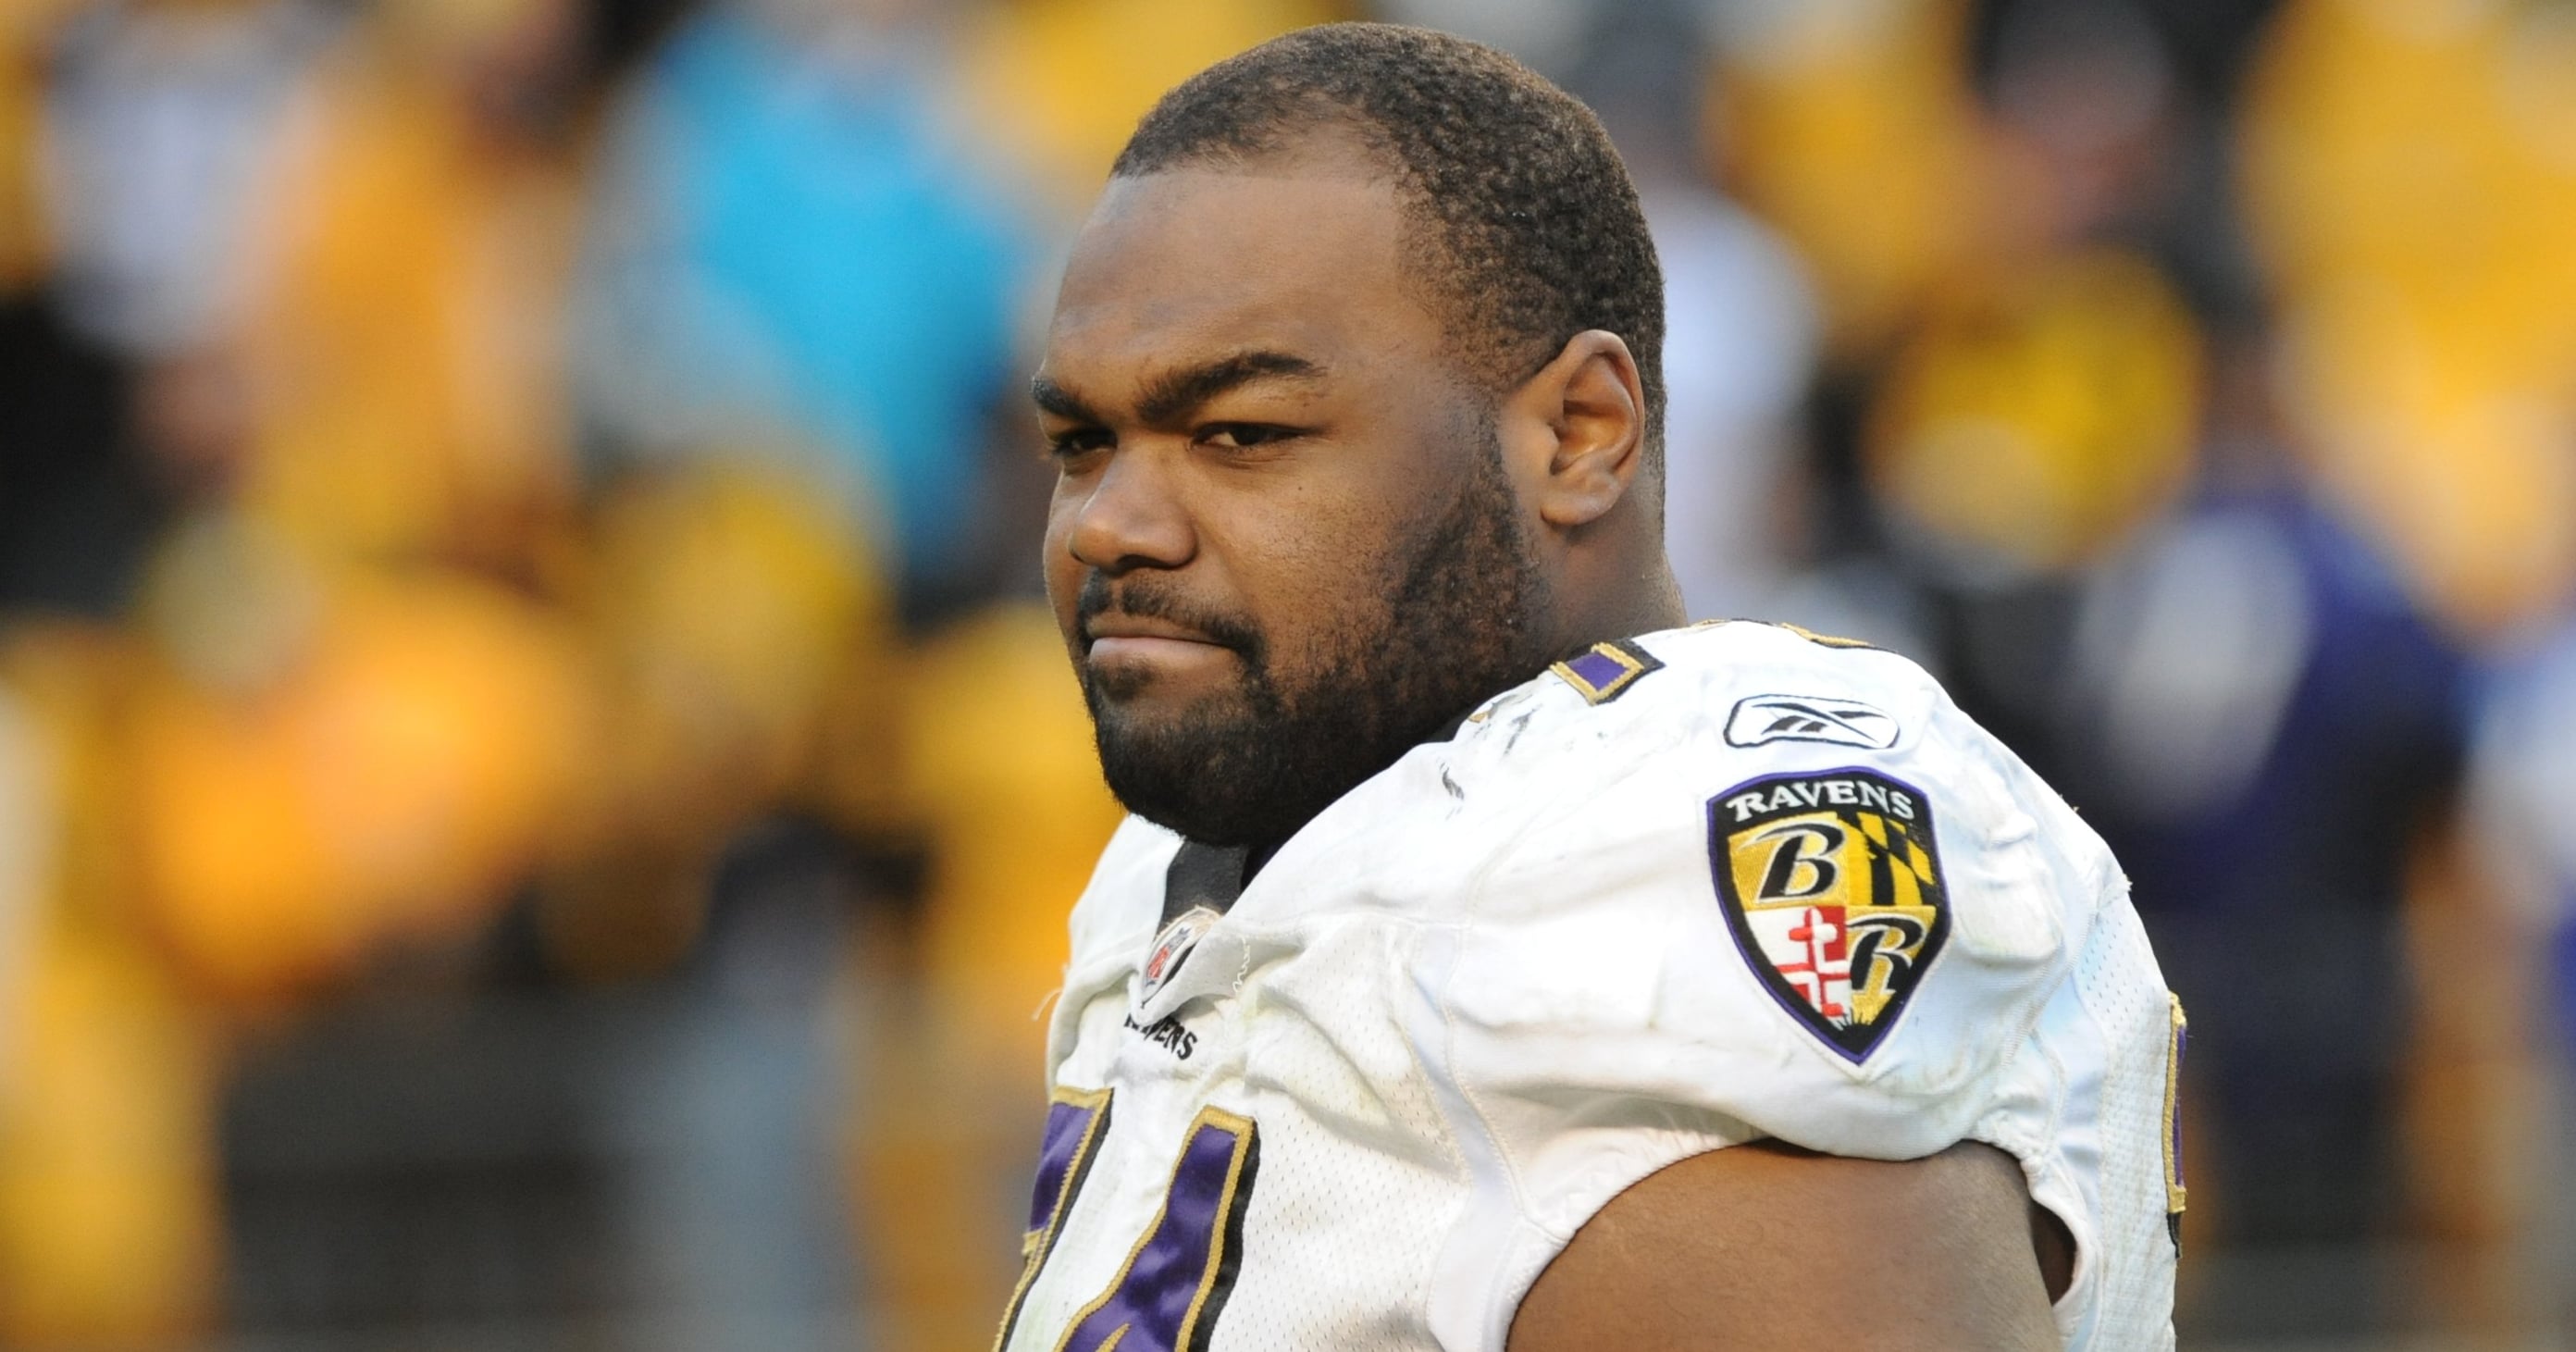 Was “The Blind Side” a Lie? Michael Oher’s Lawsuit, Explained